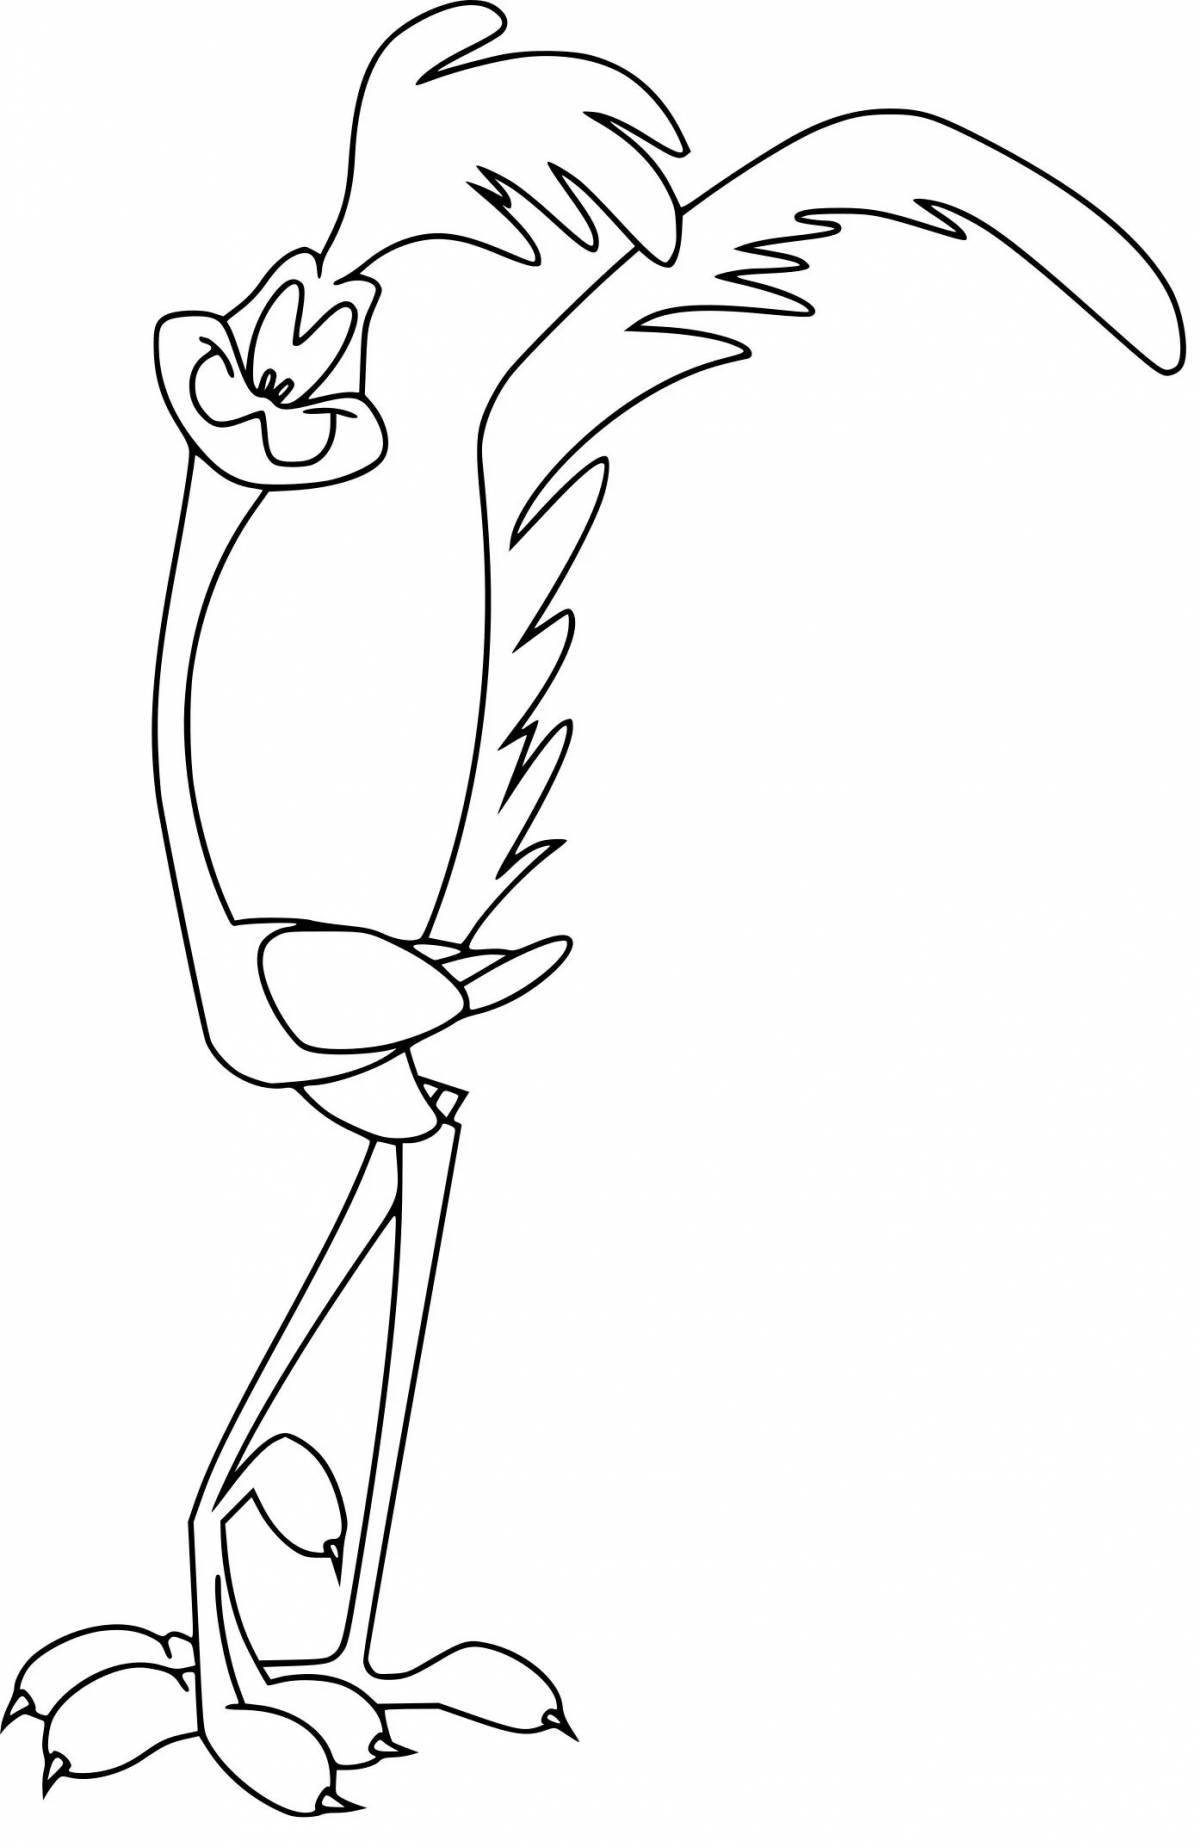 Color-lush road runner coloring page